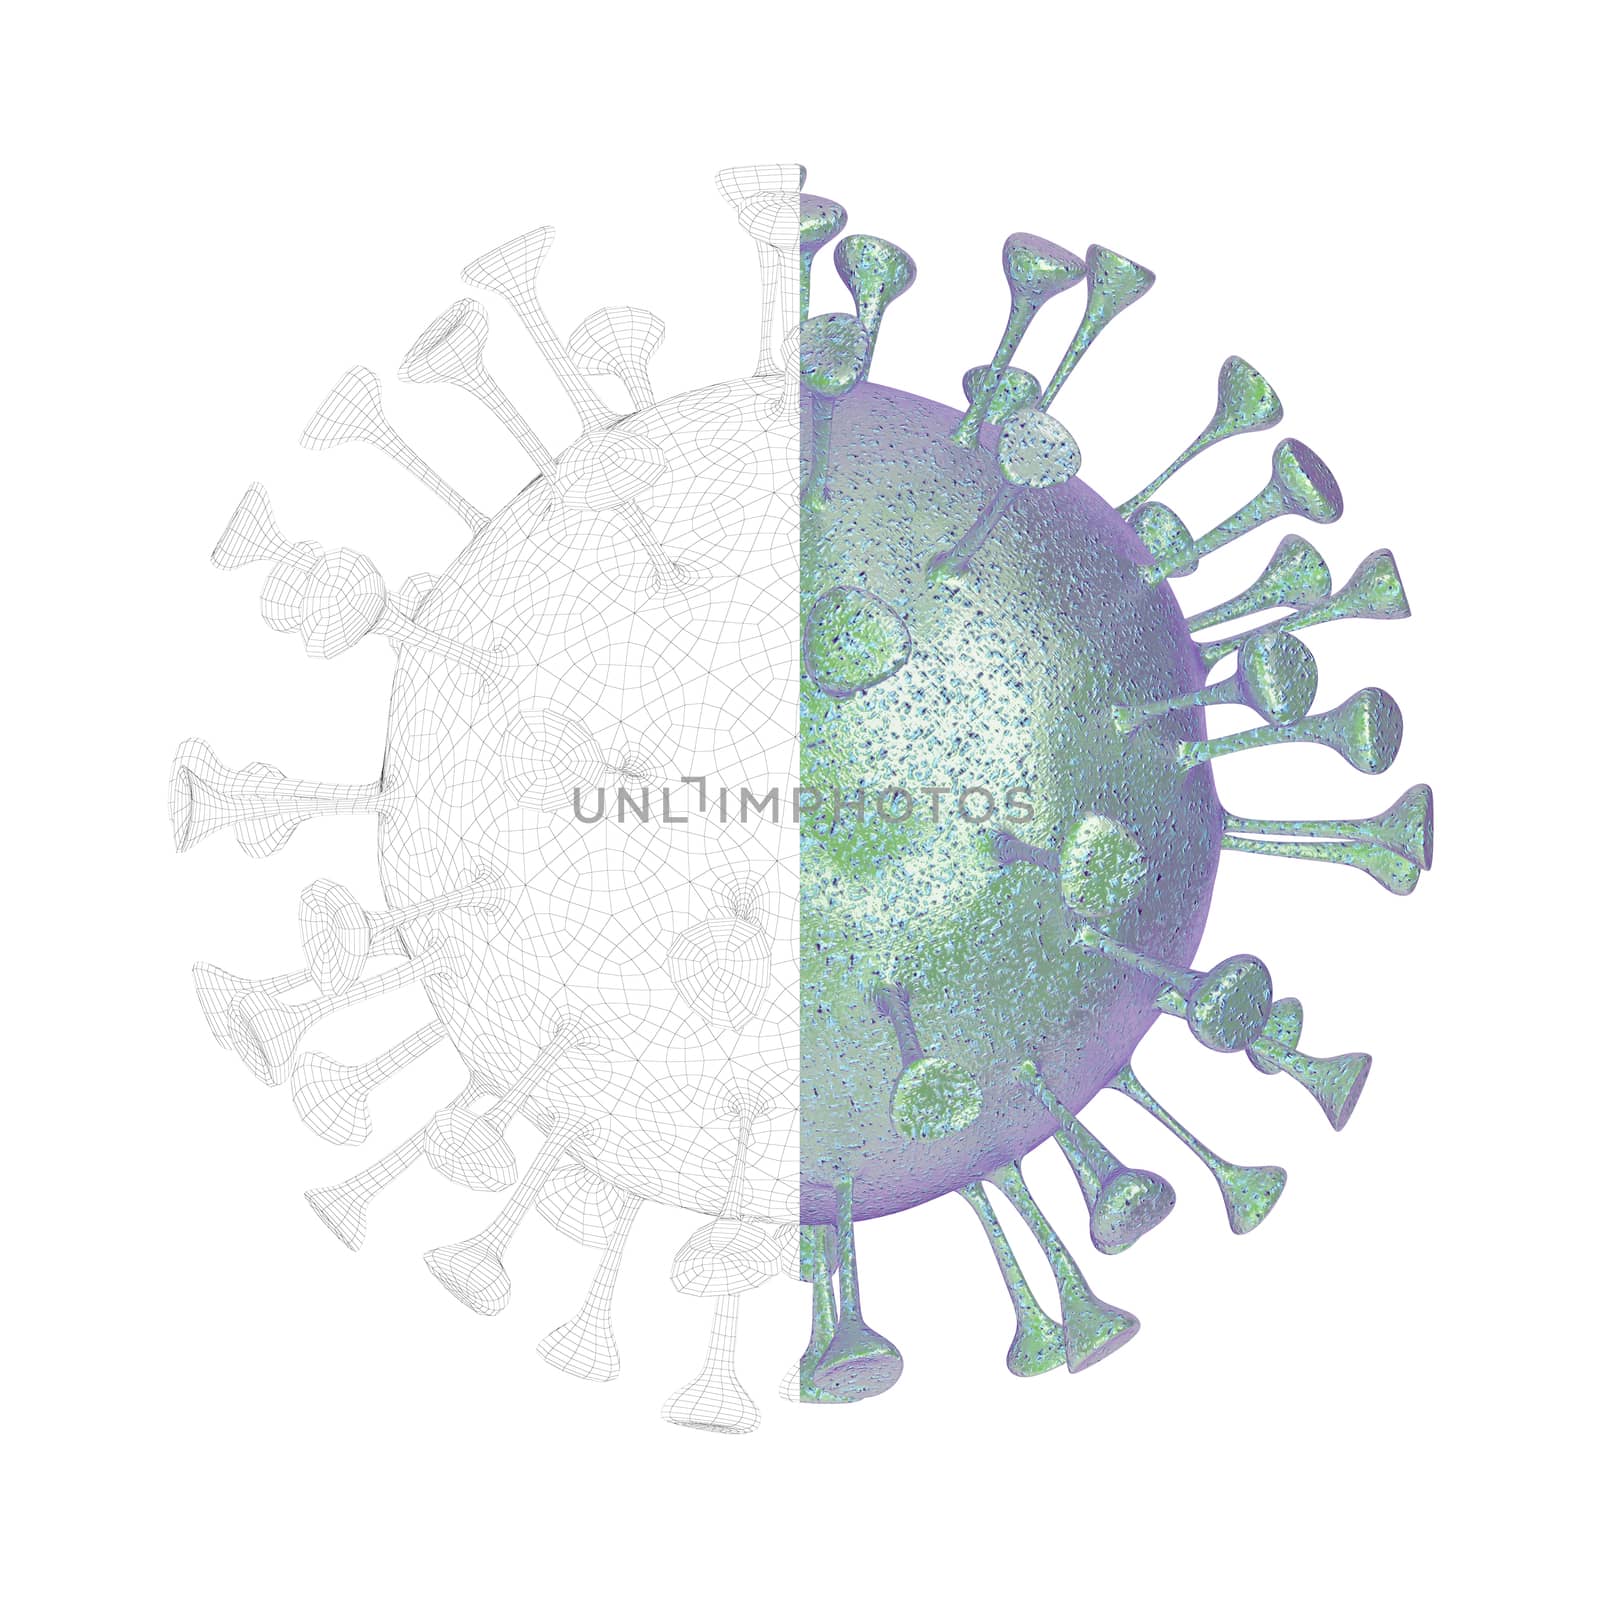 3D render of virus with visible wire-frame